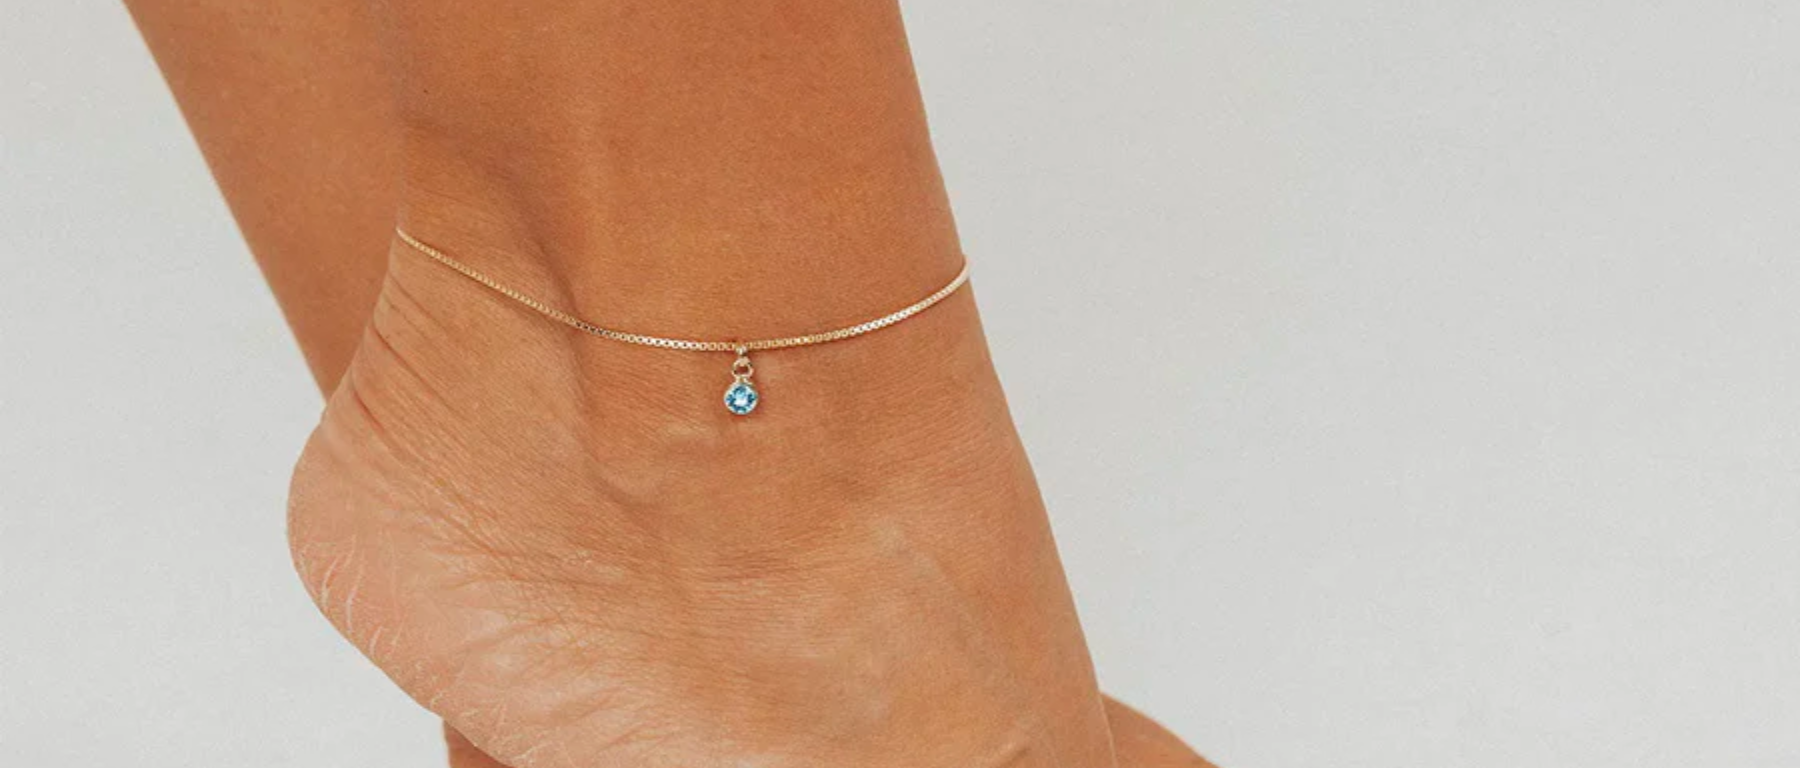 PERSONALIZED BIRTHSTONE ADJUSTABLE ANKLET (GOLD)